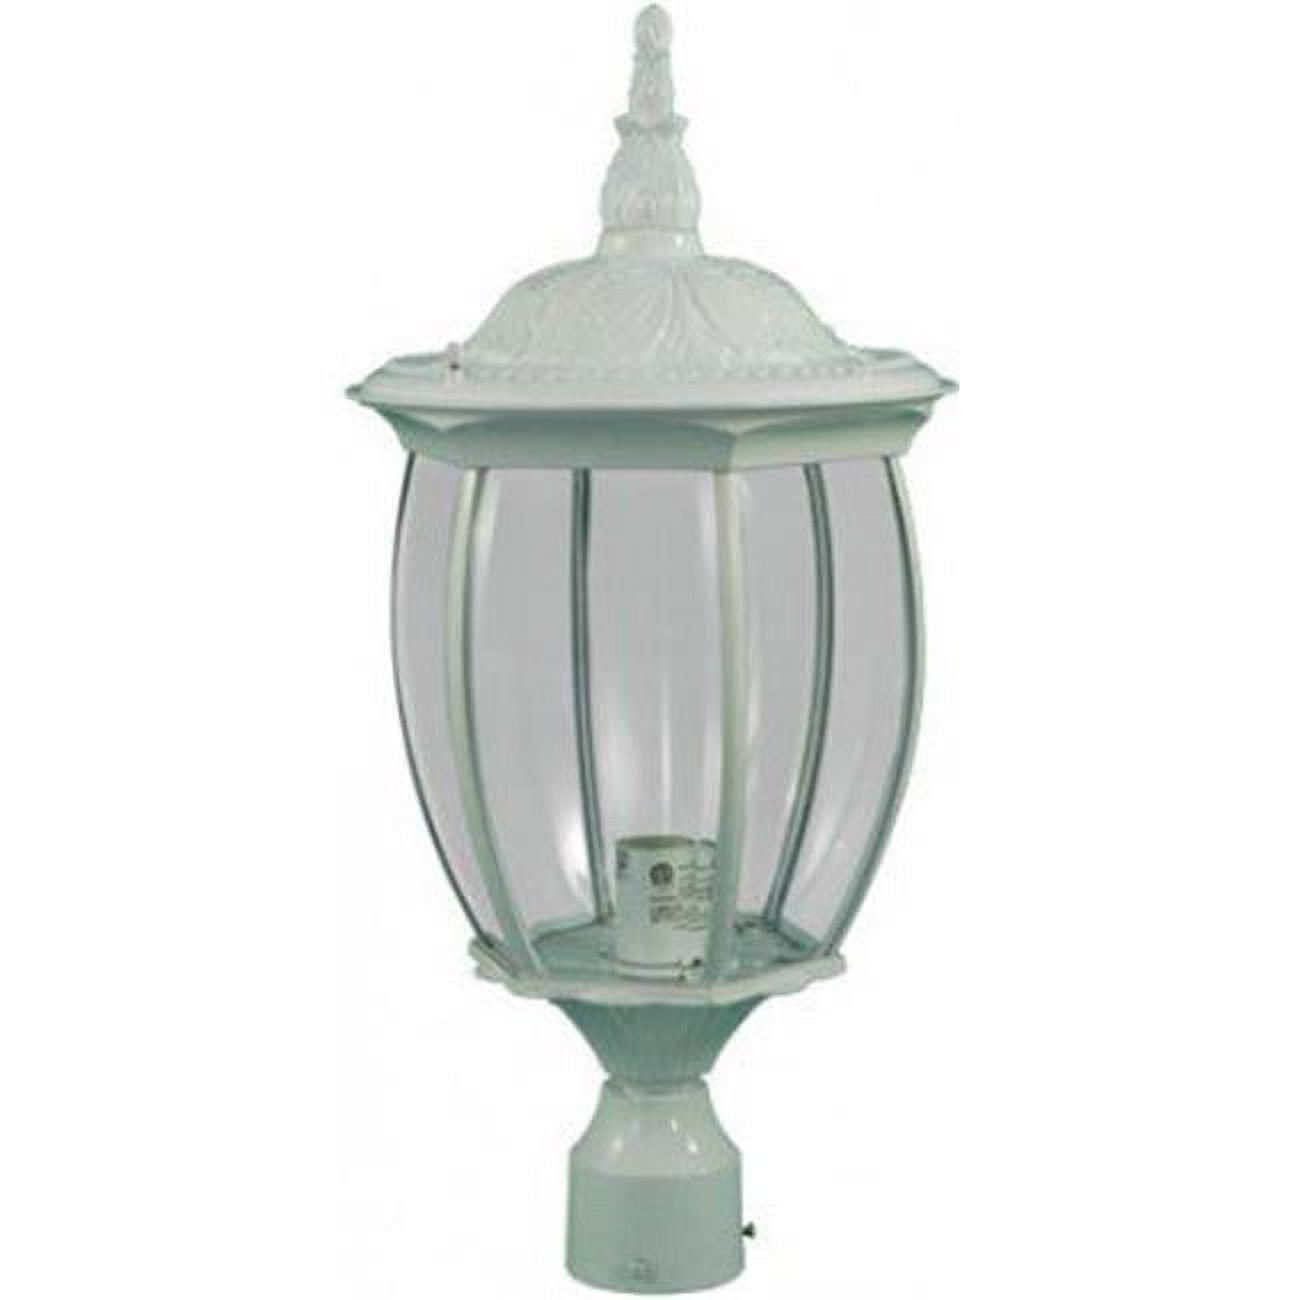 Picture of Dabmar Lighting GM102-26-W 26W & 120V S26-GU24 Victoria Post Top Light Fixture - White